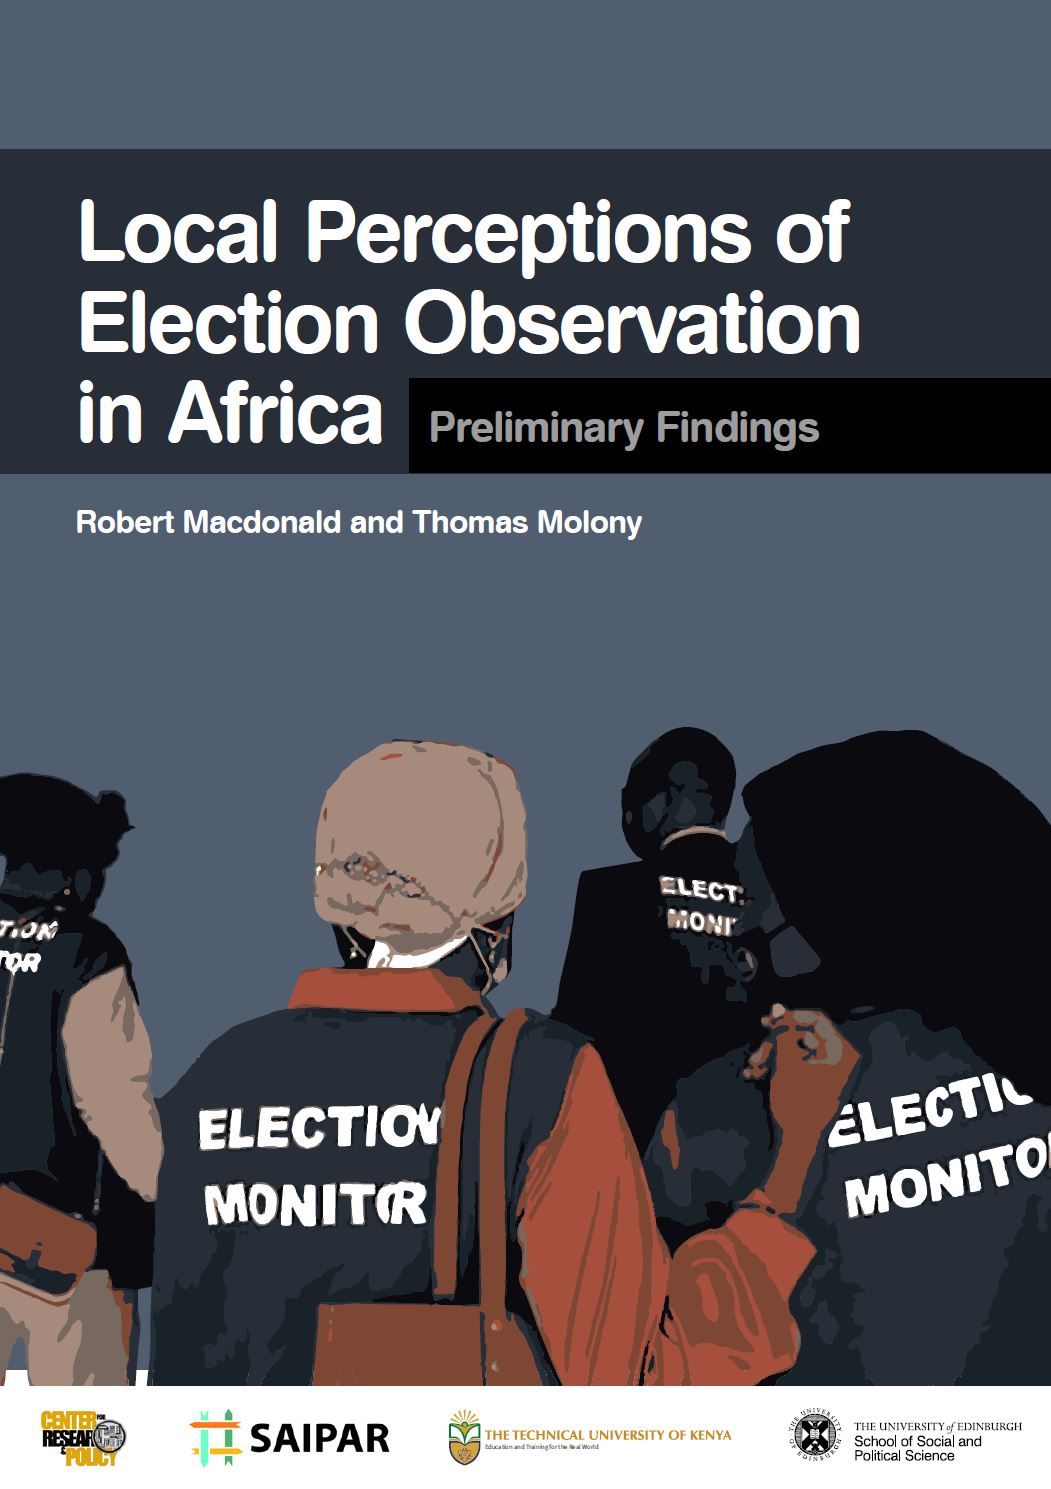 Local Perceptions of Election Observation in Africa - Preliminary Findings